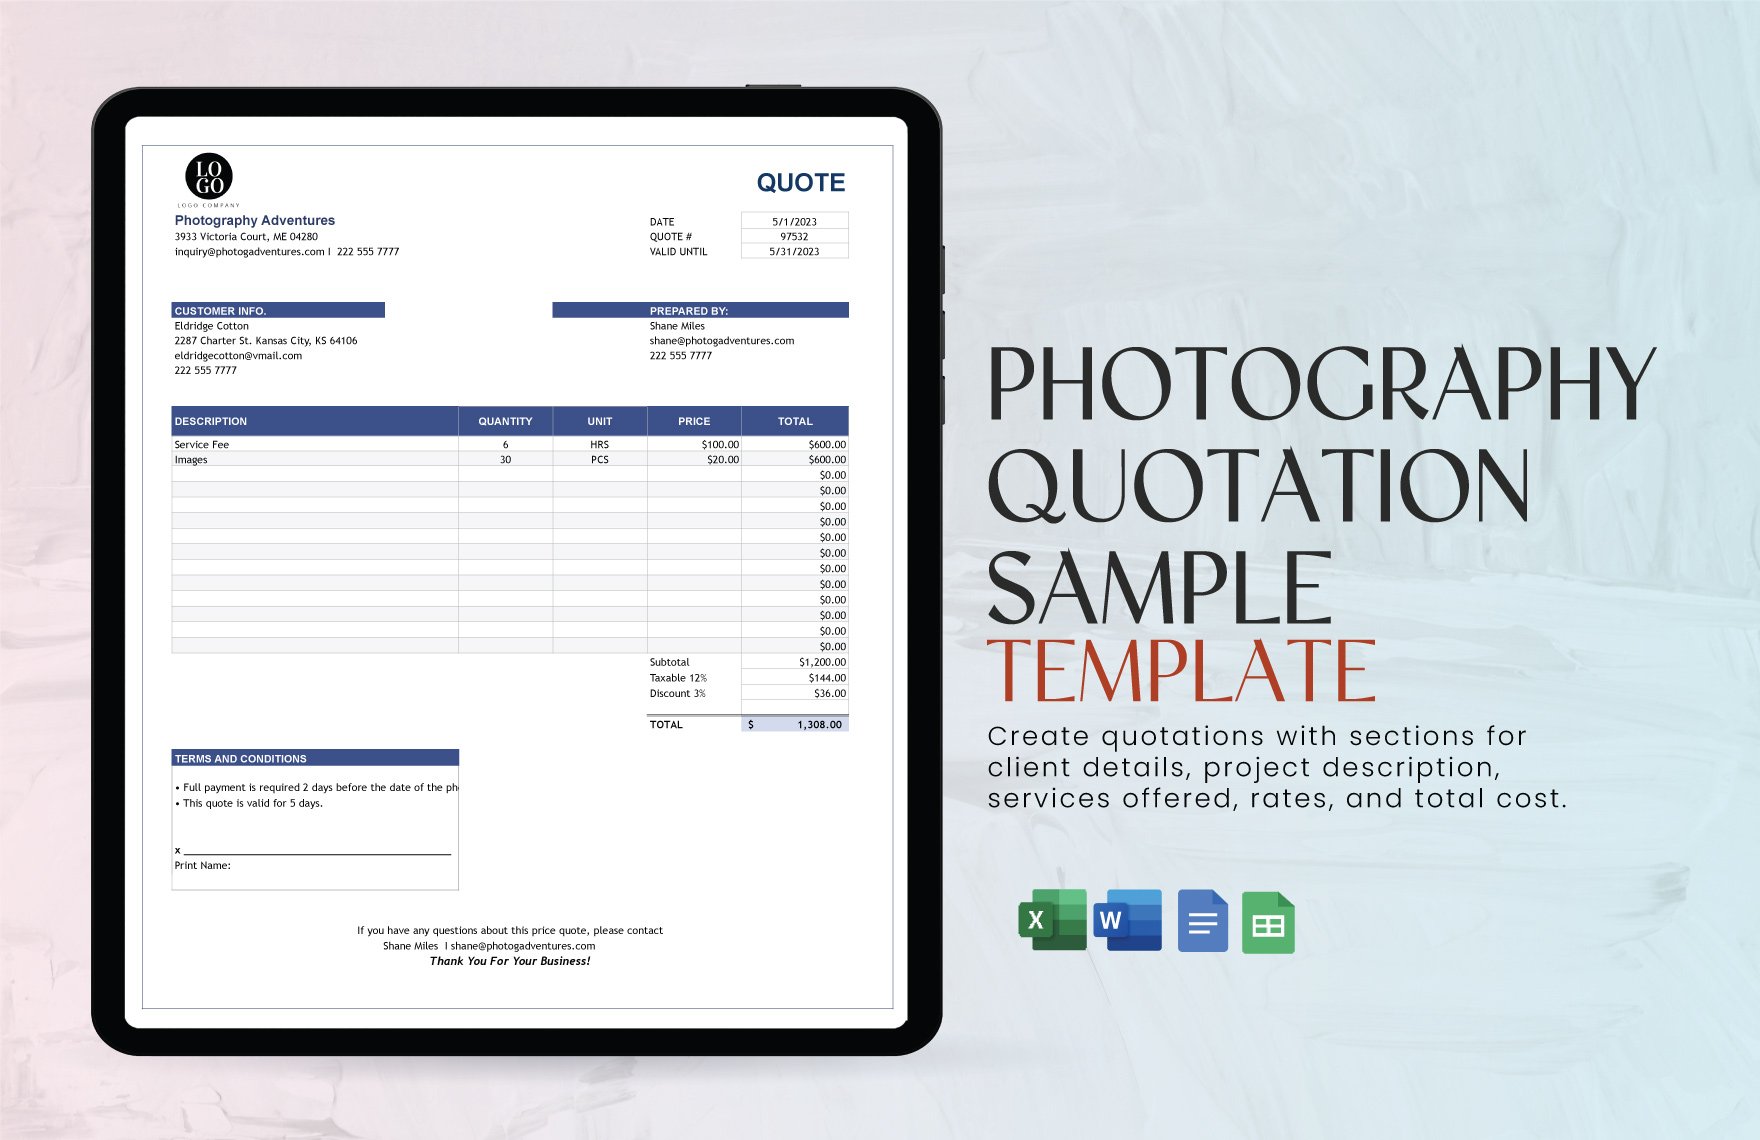 Photography Quotation Sample Template in Word, Google Docs, Excel, Google Sheets